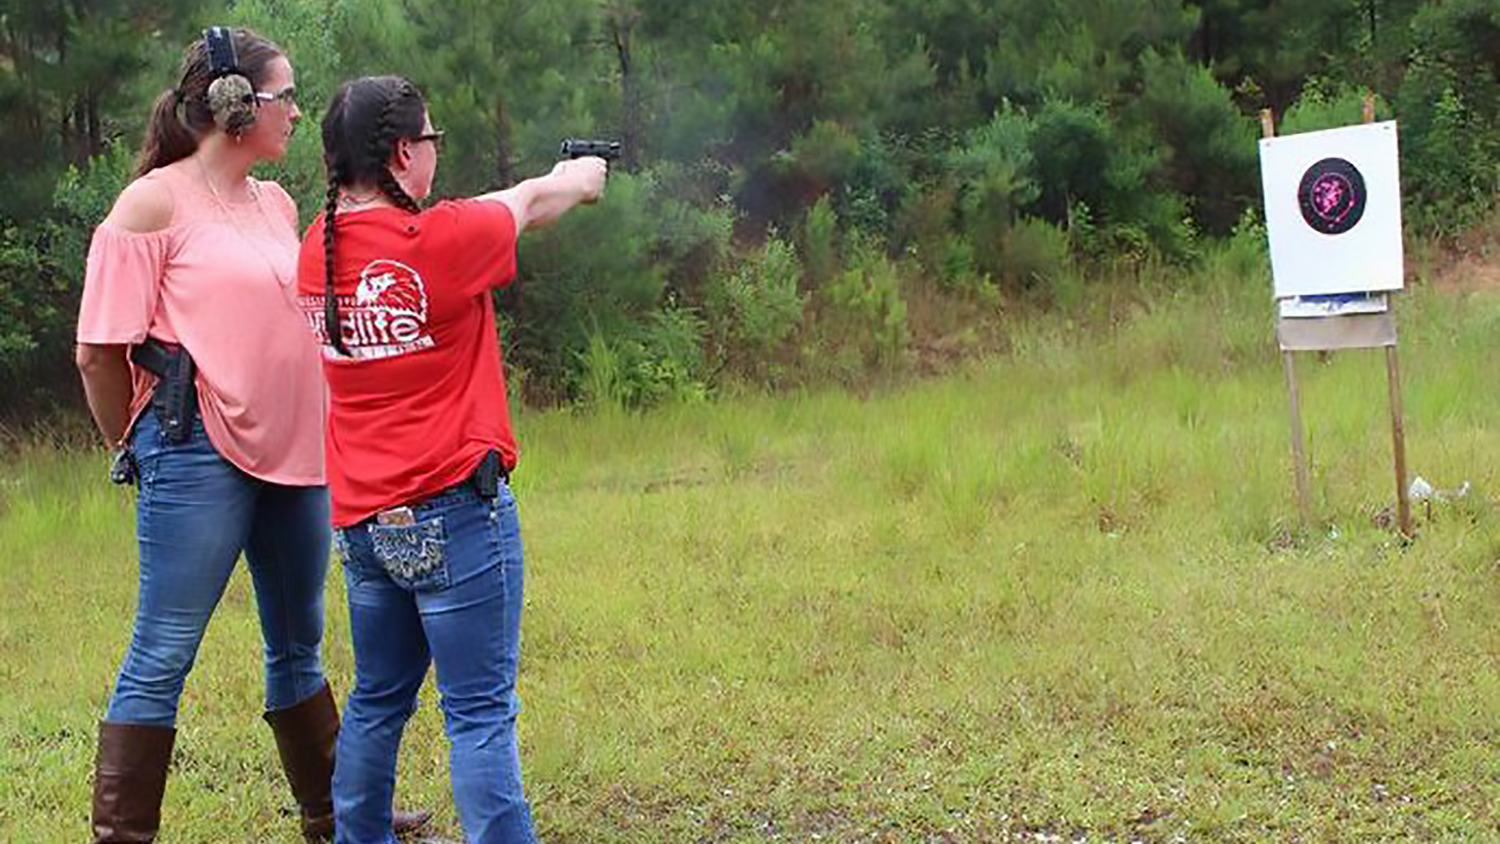 The Meridian Star: Instructor shares her passion for firearms